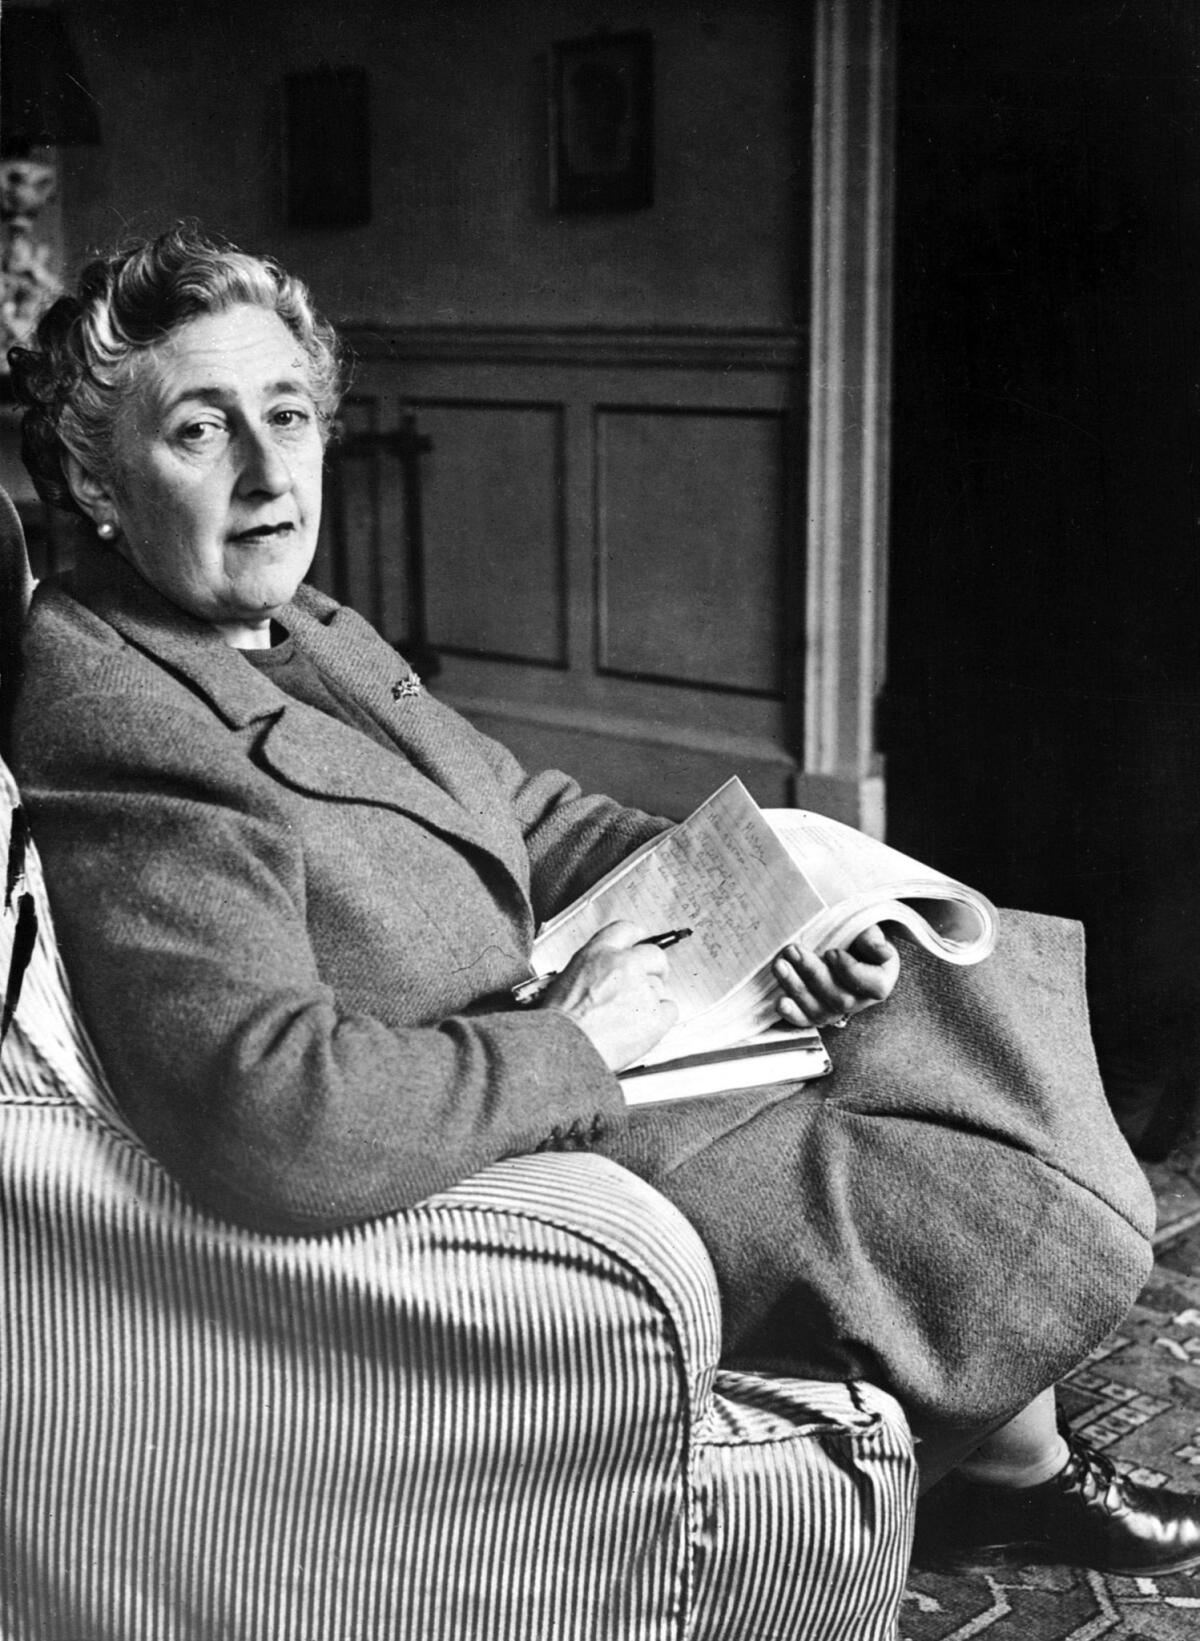 English writer Dame Agatha Christie, poses in March 1946 for a photographer holding a notebook, in her home, Greenway House, in Devonshire. Agatha Christie, born Miller (1890-1976) in Torquay, Devon, wrote, under the surname of her fist husband Colonel Archibald Christie (divorced in 1928) more than 70 detective novels featuring the Belgian detective, Hercule Poirot, or the inquiring village lady, Miss Marple. In 1930, Christie married Max E. L. Mallowan (1904-1978; knighted in 1968), professor of archaeology at London University (1947-78), with whom she travelled on several expeditions. Several of her stories have become popular films, such as "Murder on the Orient Express" (1974) and "Death on the Nile (1978). Christie was made a dame in 1971. (Photo credit should read -/AFP/Getty Images)